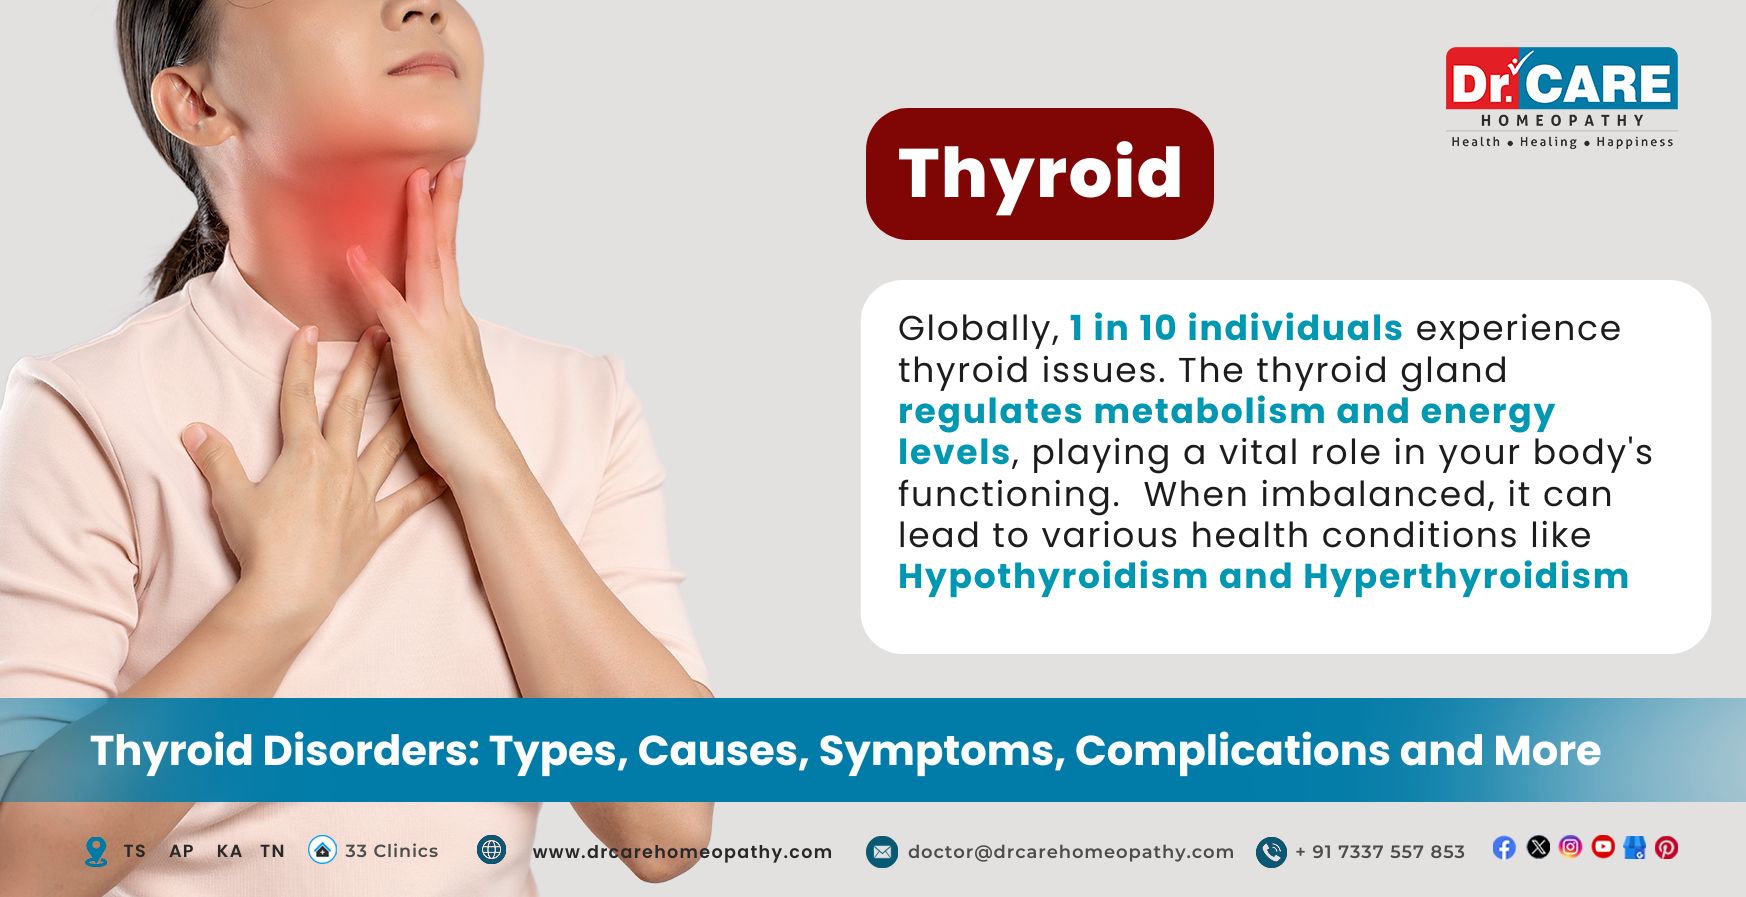 Thyroid Disorders: Types, Causes, Symptoms, and More